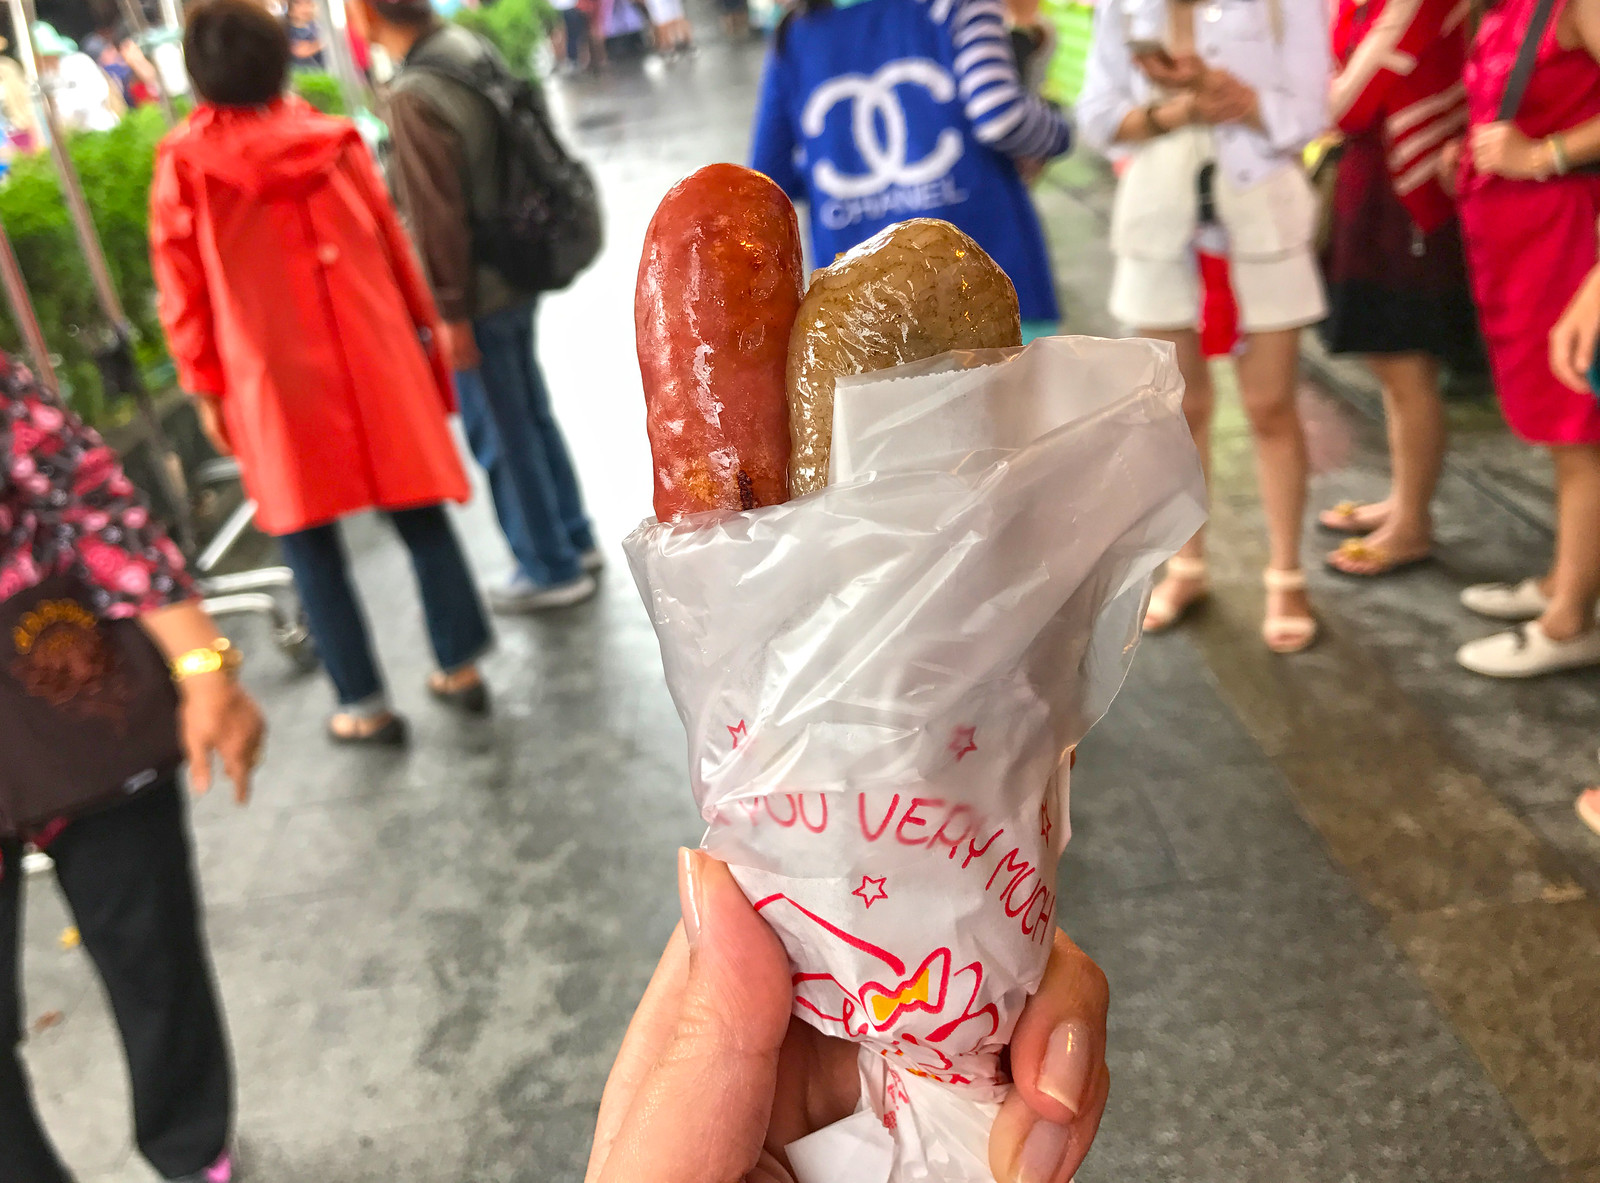 Small sausage in large sausage